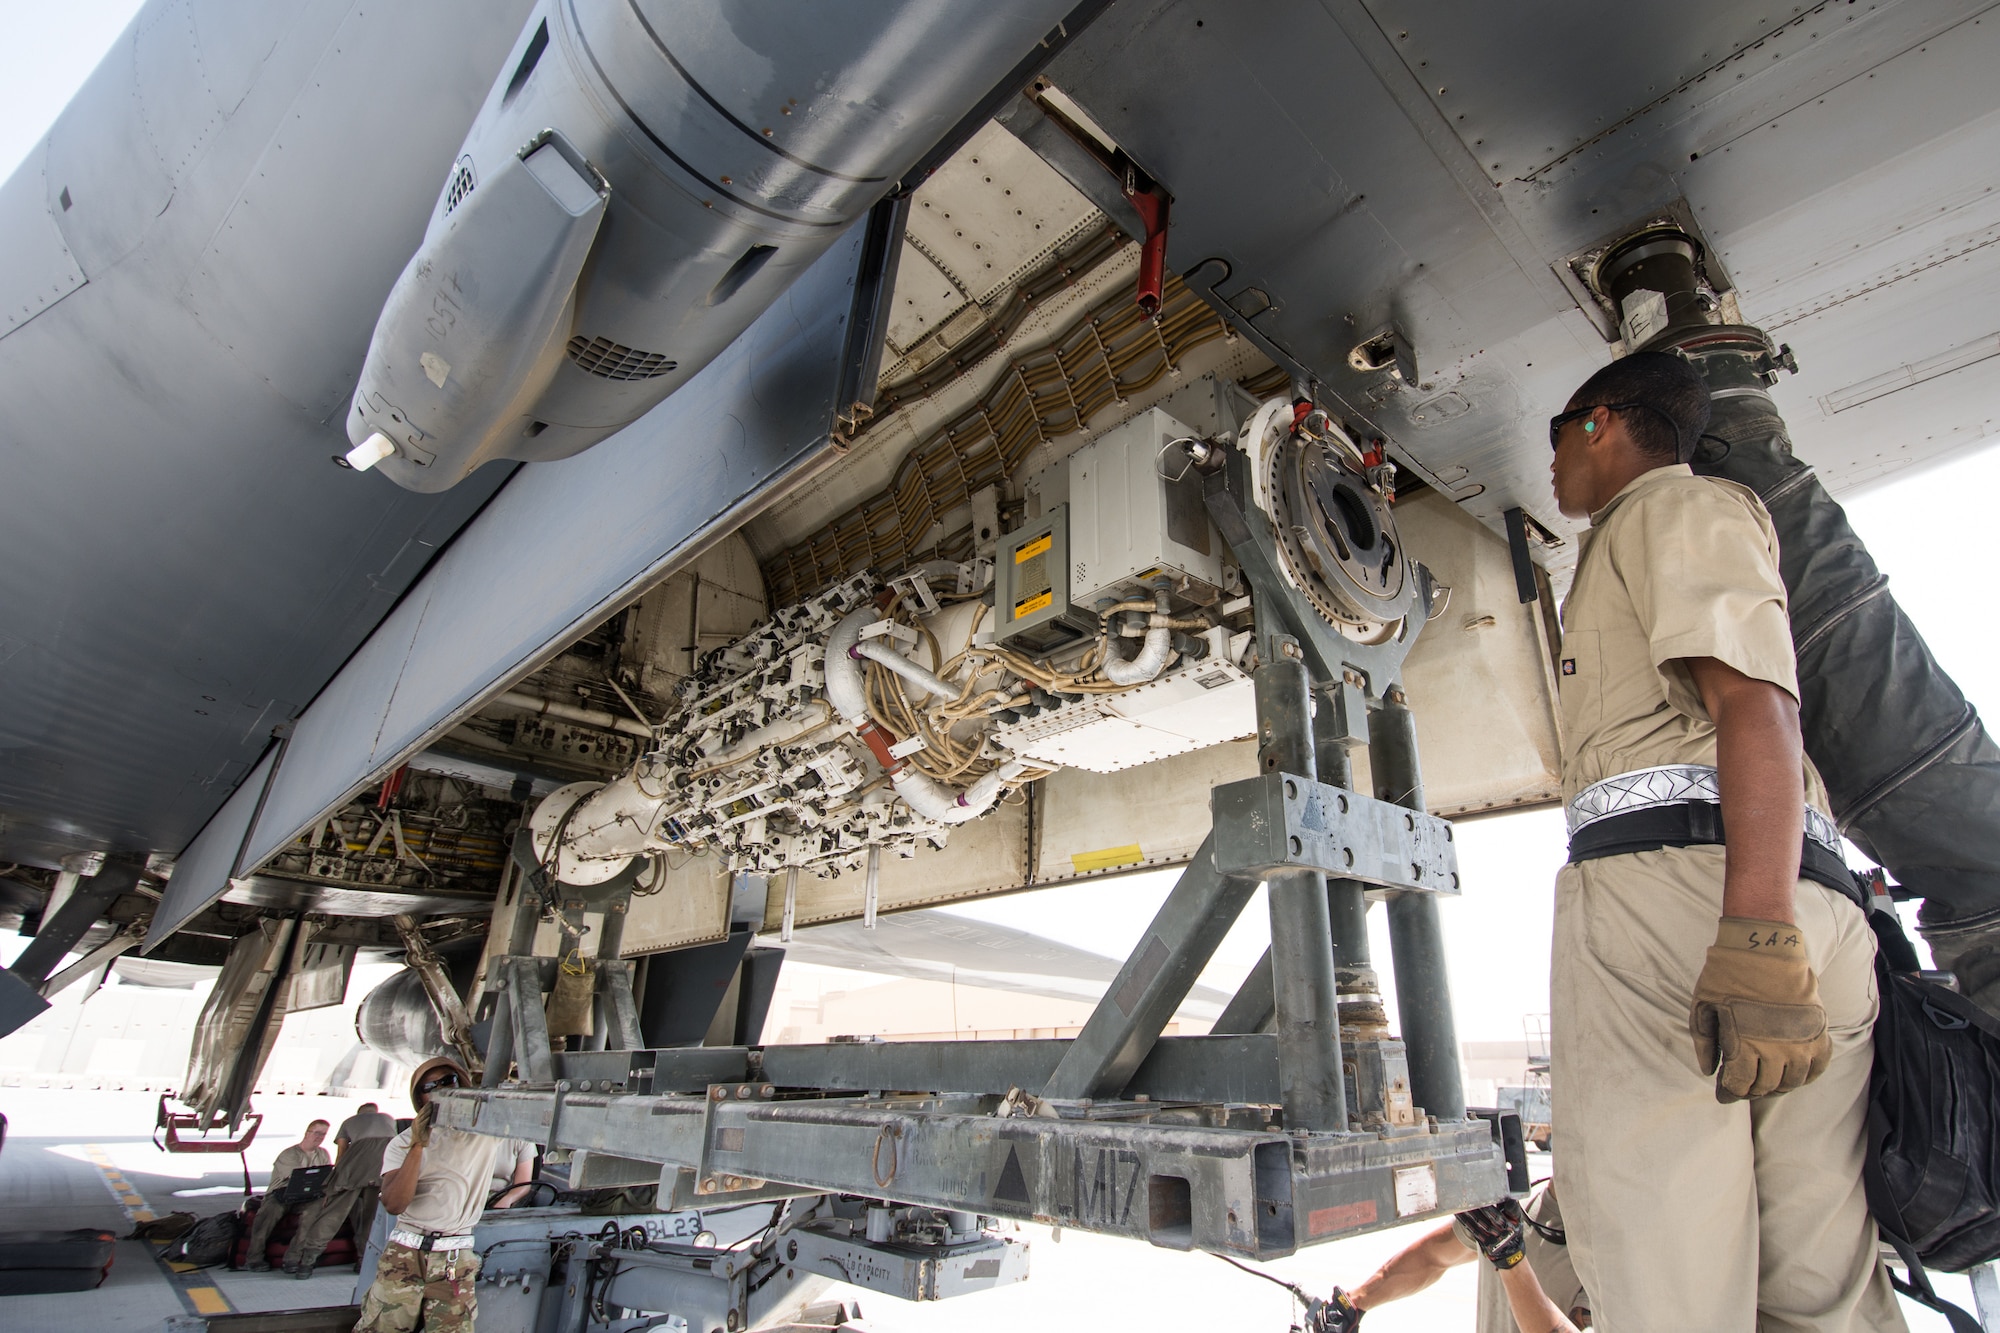 Weapons load crews assigned to the 9th Expeditionary Bomb Squadron conduct a training exercise on the B-1B Lancer with inert munitions at Al Udeid Air Base, Qatar, Sept. 13, 2018. The event involved reconfiguring the aircraft with inert munitions to maintain a high state of readiness. The B-1B Lancer carries the largest conventional payload of both guided and unguided weapons in the Air Force inventory and is the backbone of America's long-range bomber force. It can rapidly deliver massive quantities of precision and non-precision weapons against any adversary, anywhere in the world, at any time. Its armaments include up to 24 AGM-158A Joint Air-to-Surface Standoff Munitions. (U.S. Air Force photo by Tech. Sgt. Ted Nichols/Released)